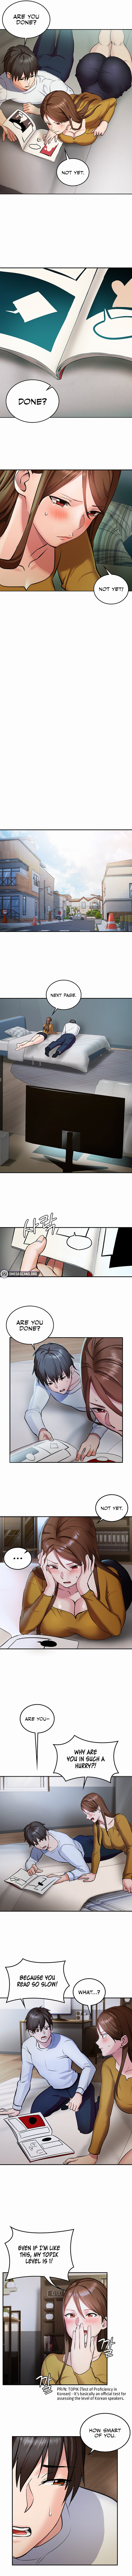 The Girl Next Door - Chapter 1 Page 6